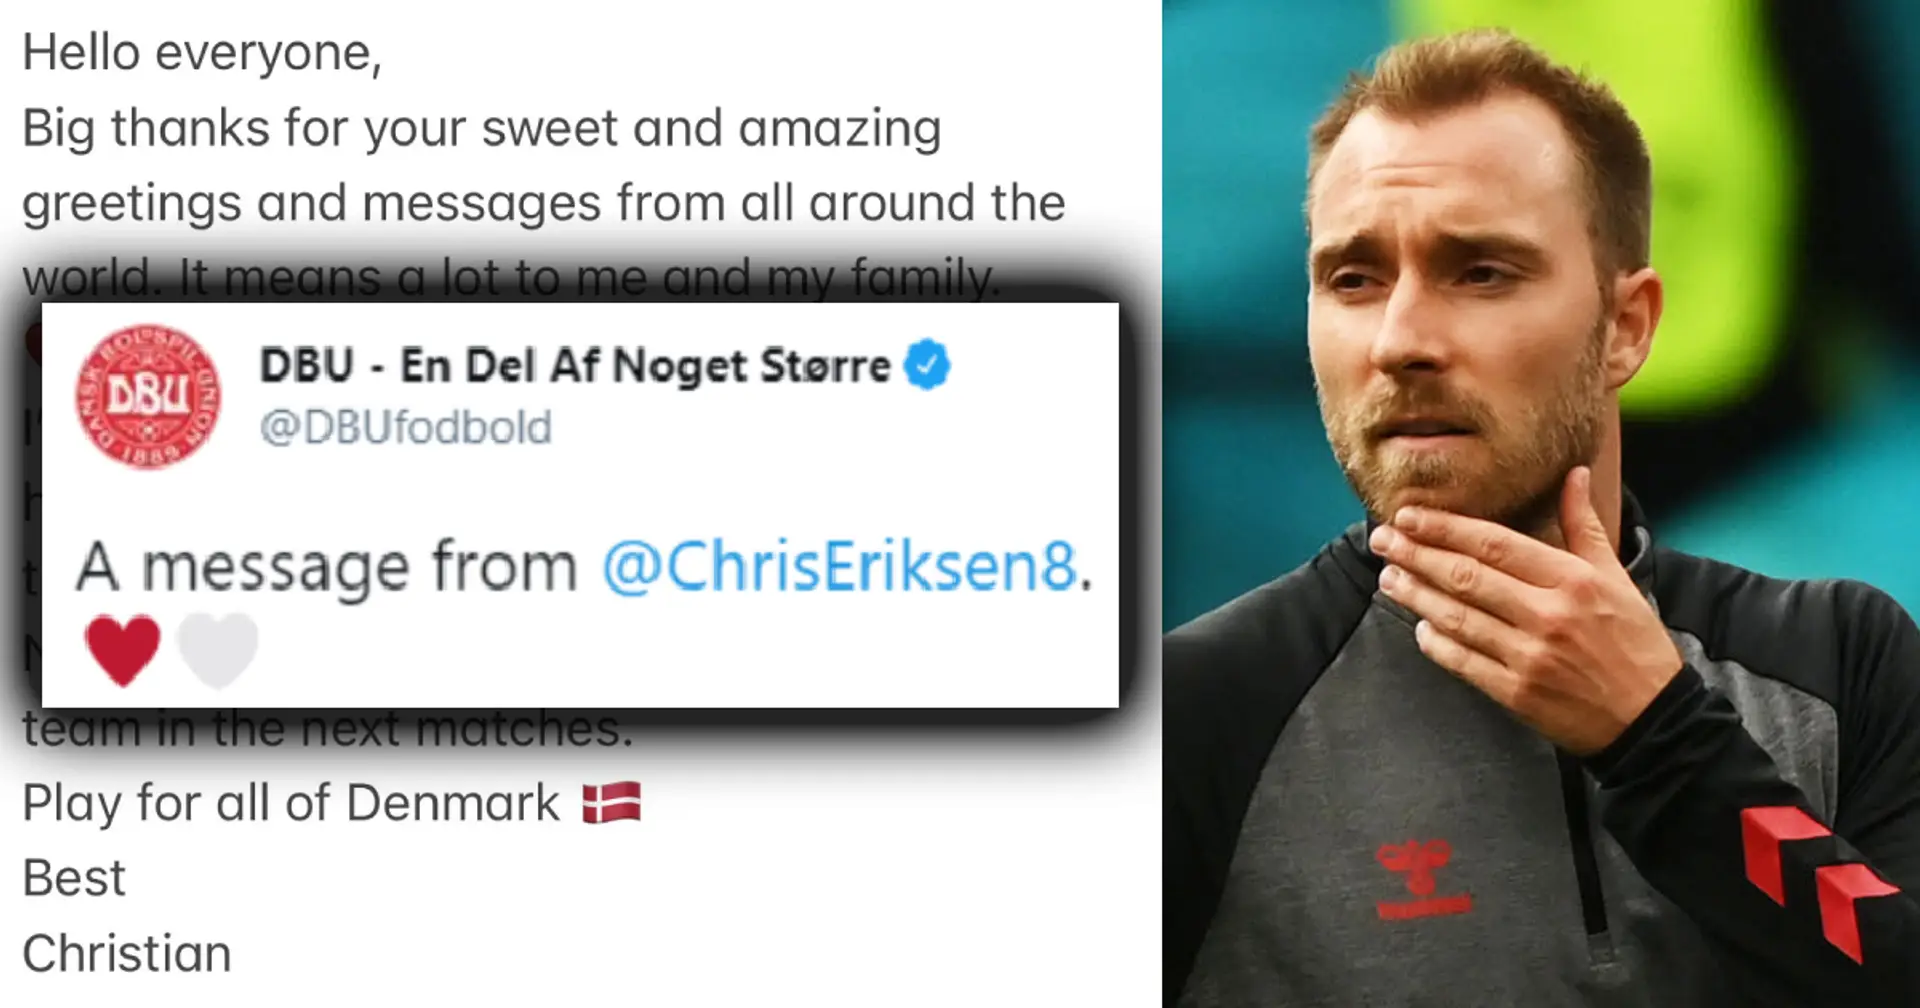 Christian Eriksen posts first pic of himself and message after on-pitch collapse